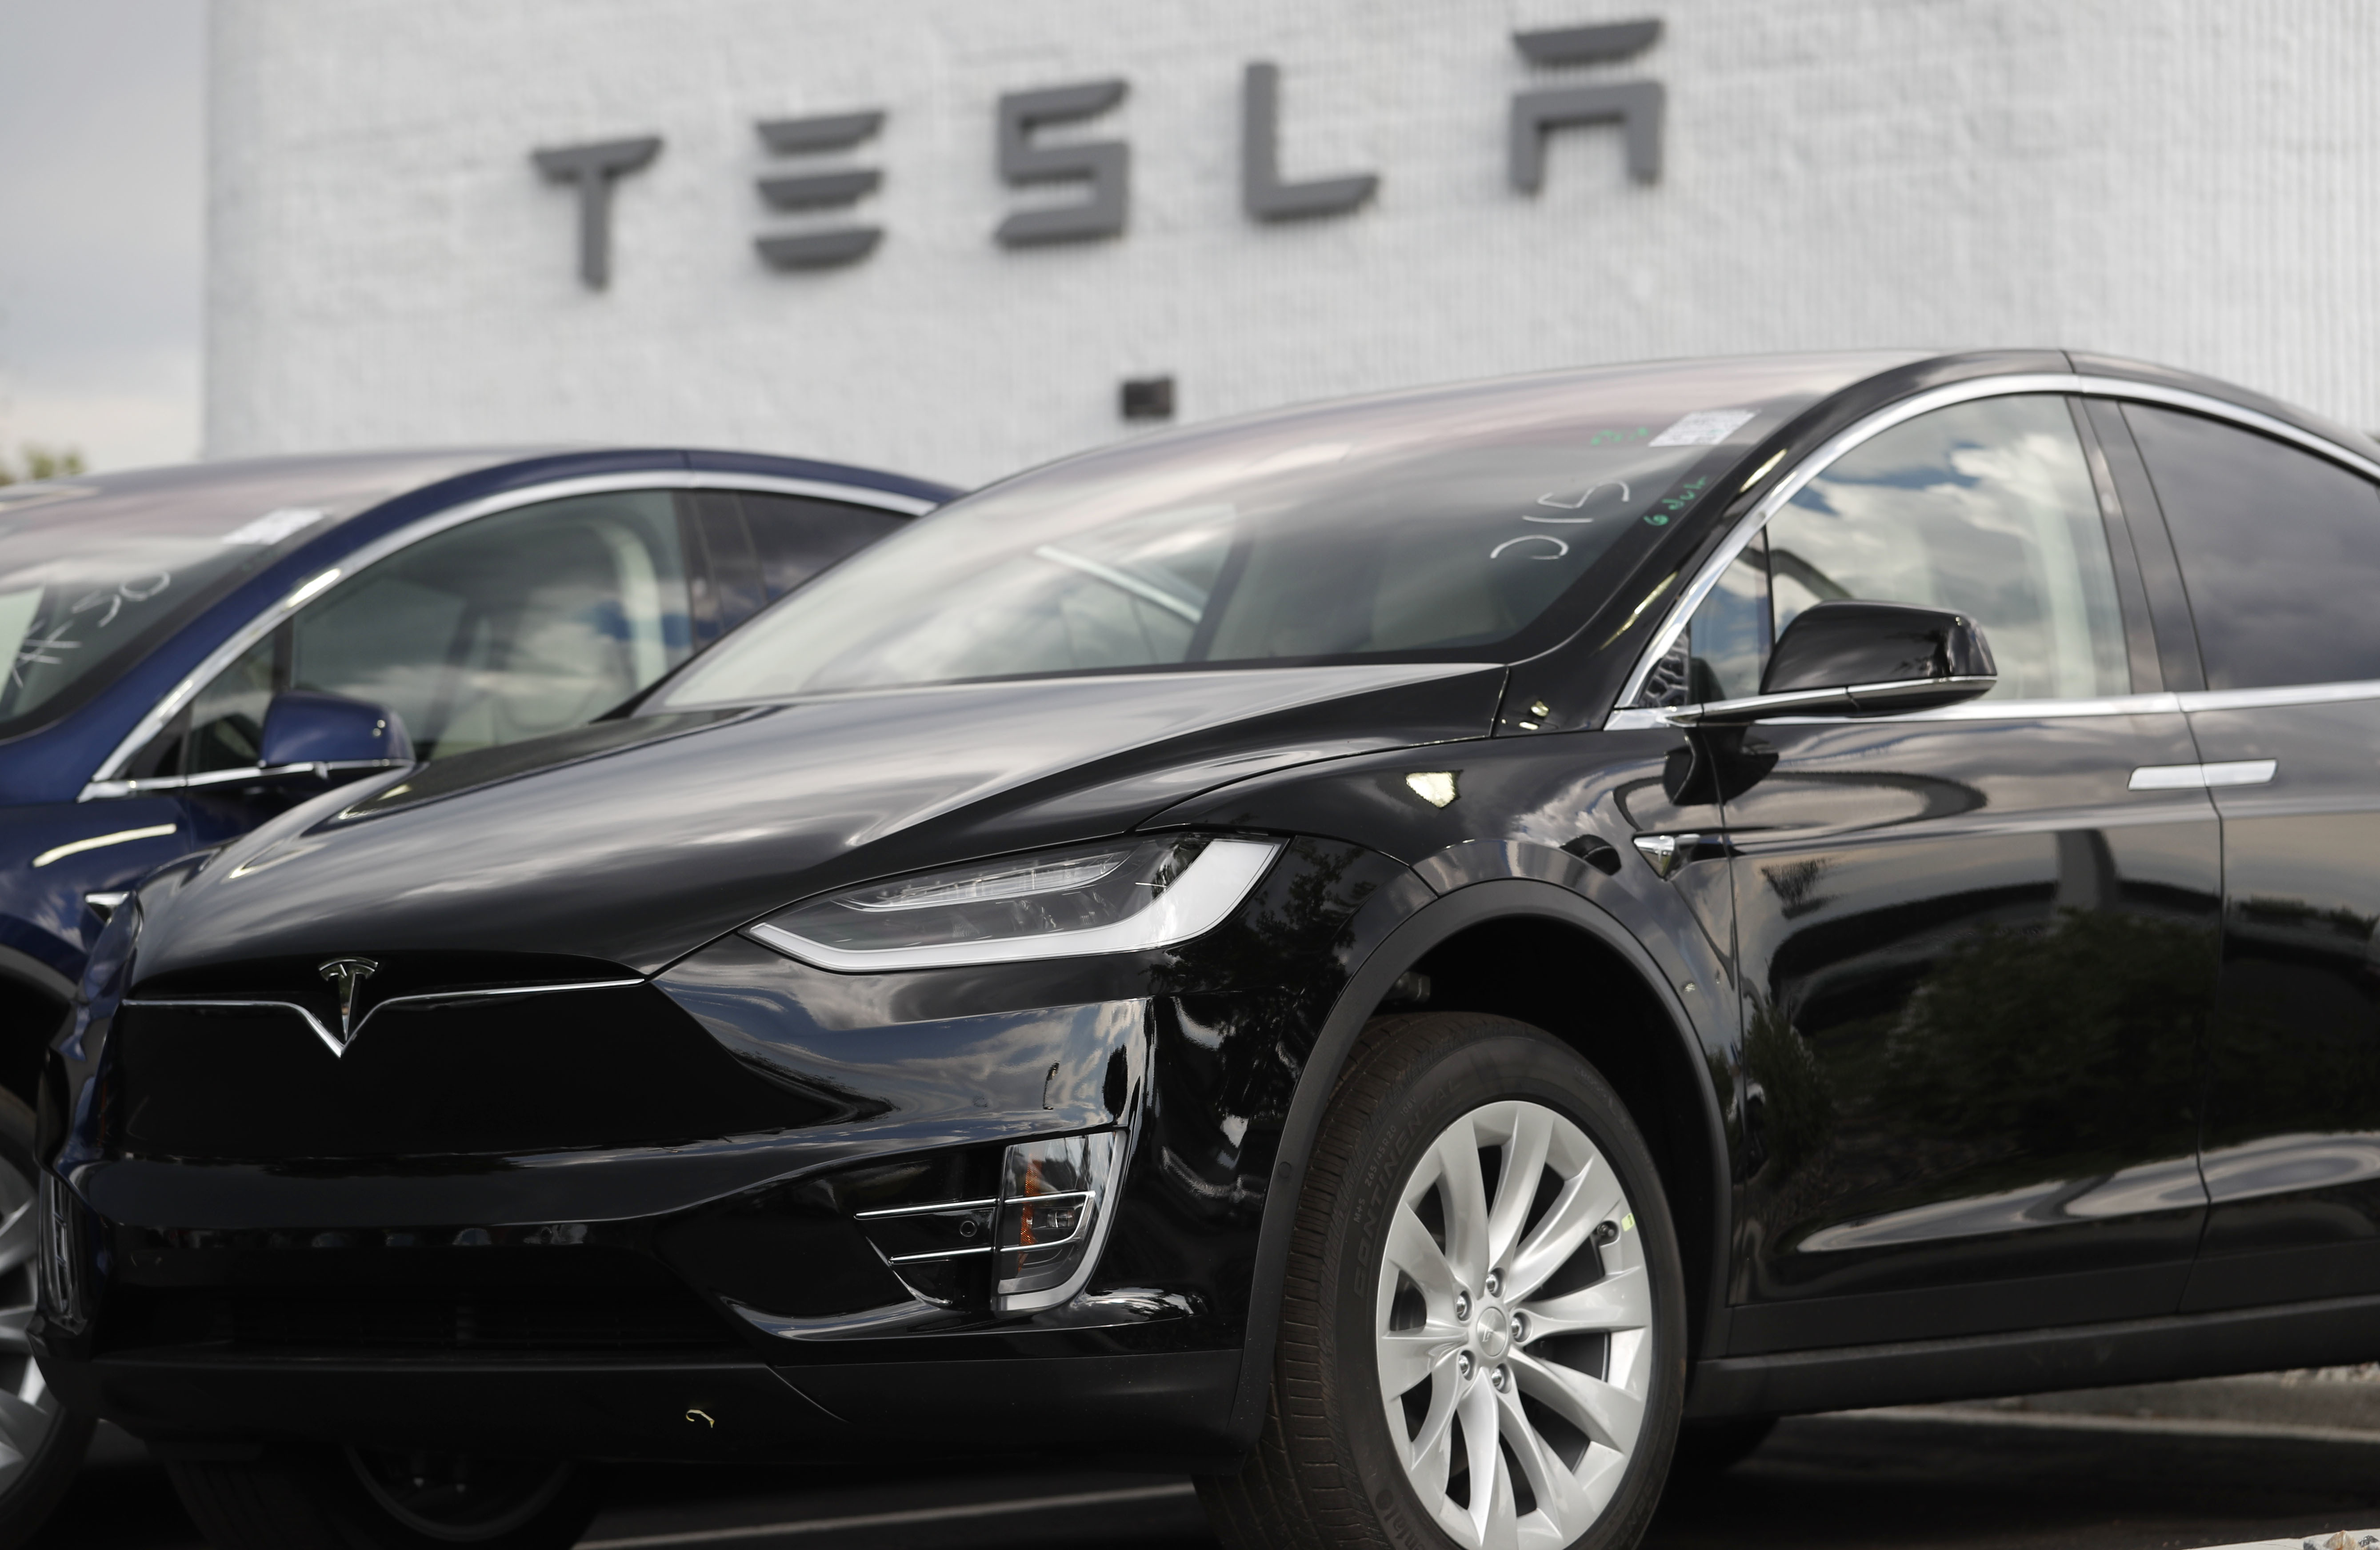 tesla-buyers-have-hours-left-to-qualify-for-7-500-tax-credit-the-blade